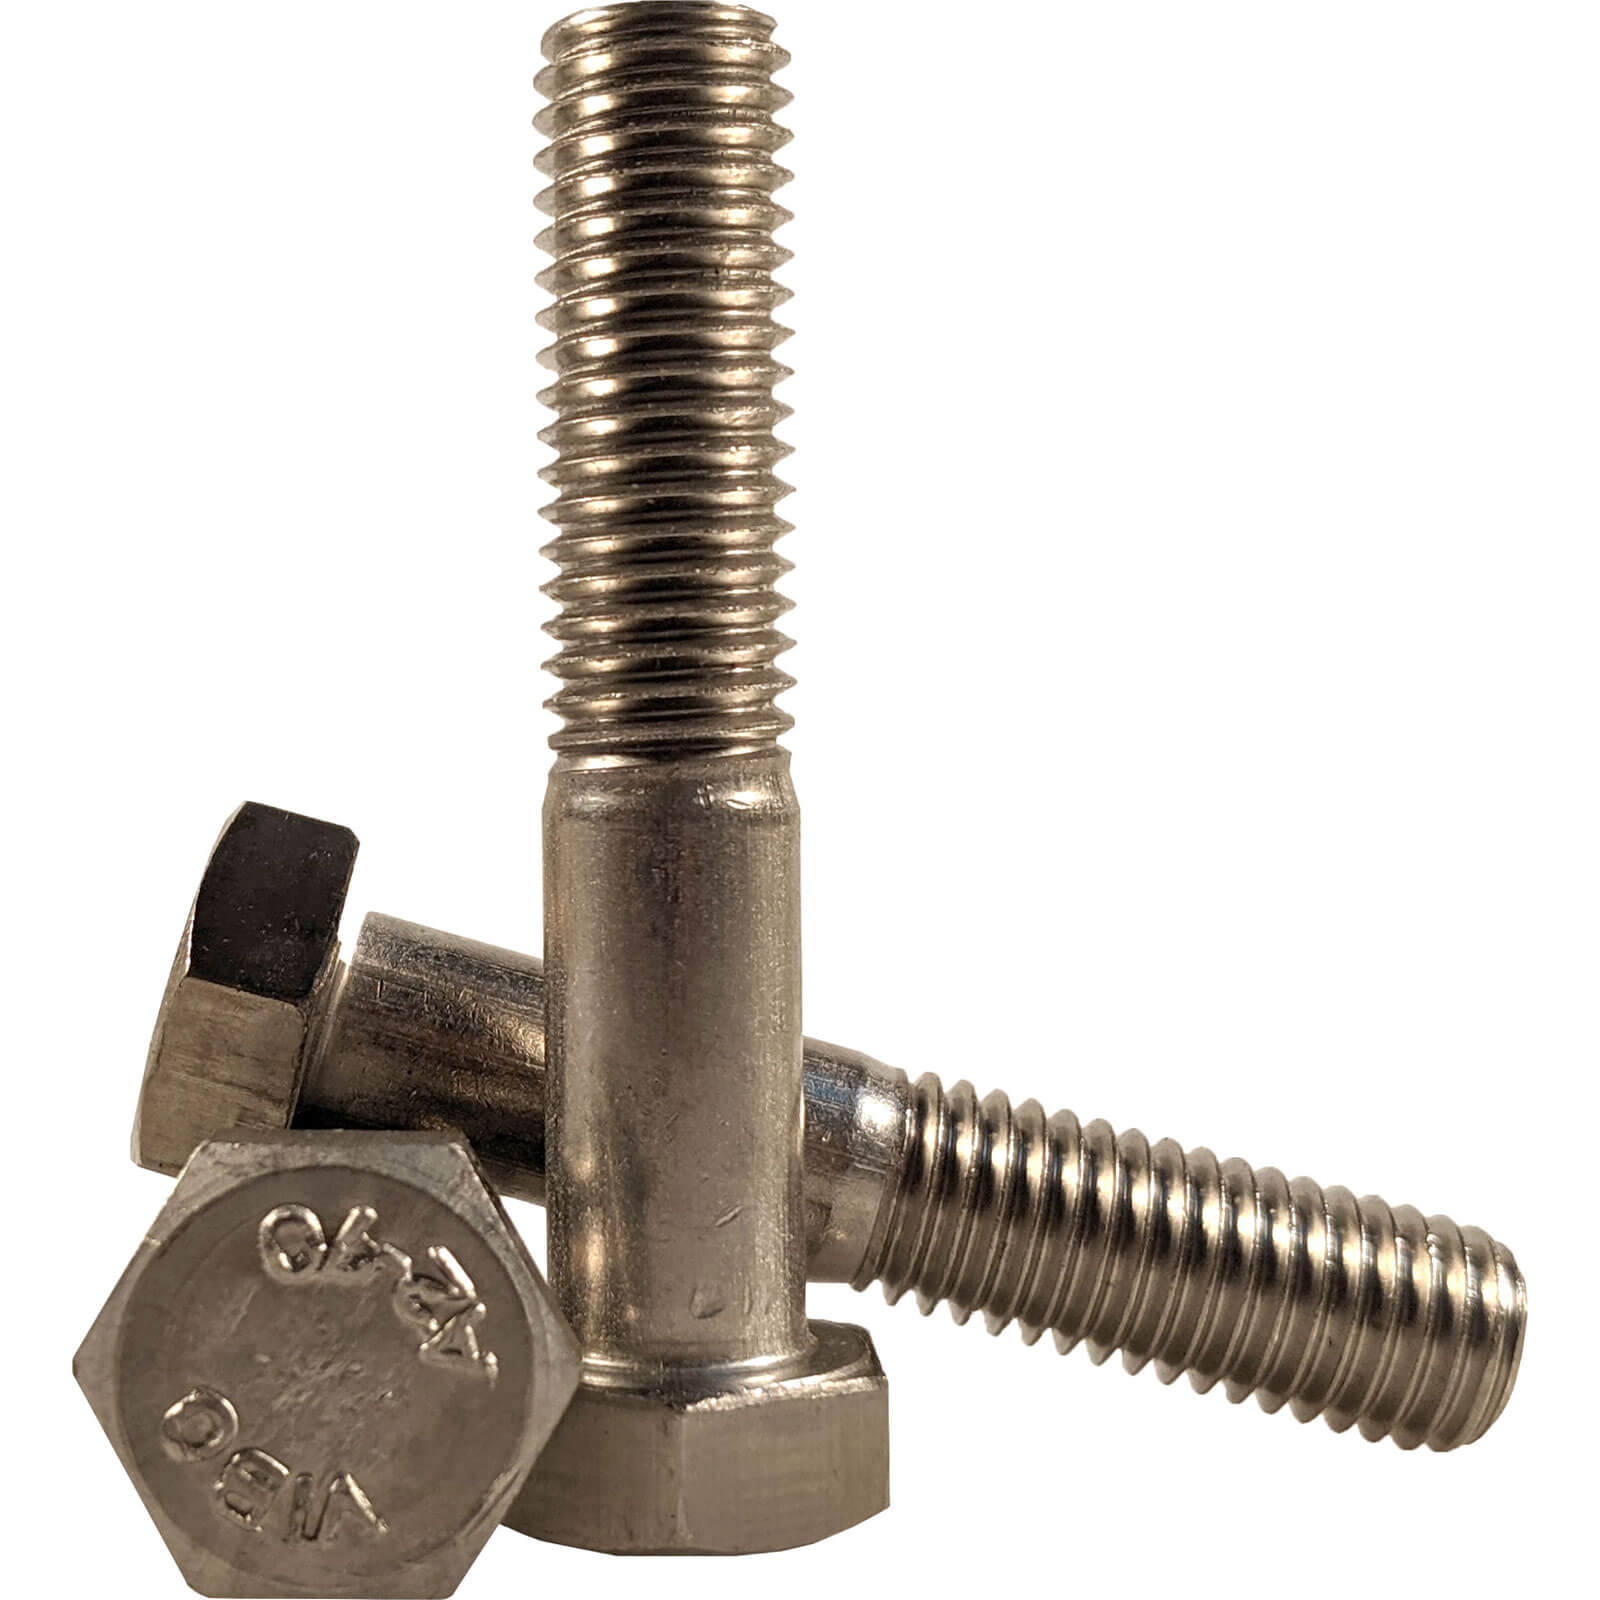 Image of Sirius Bolts A4 316 Stainless Steel M16 60mm Pack of 1